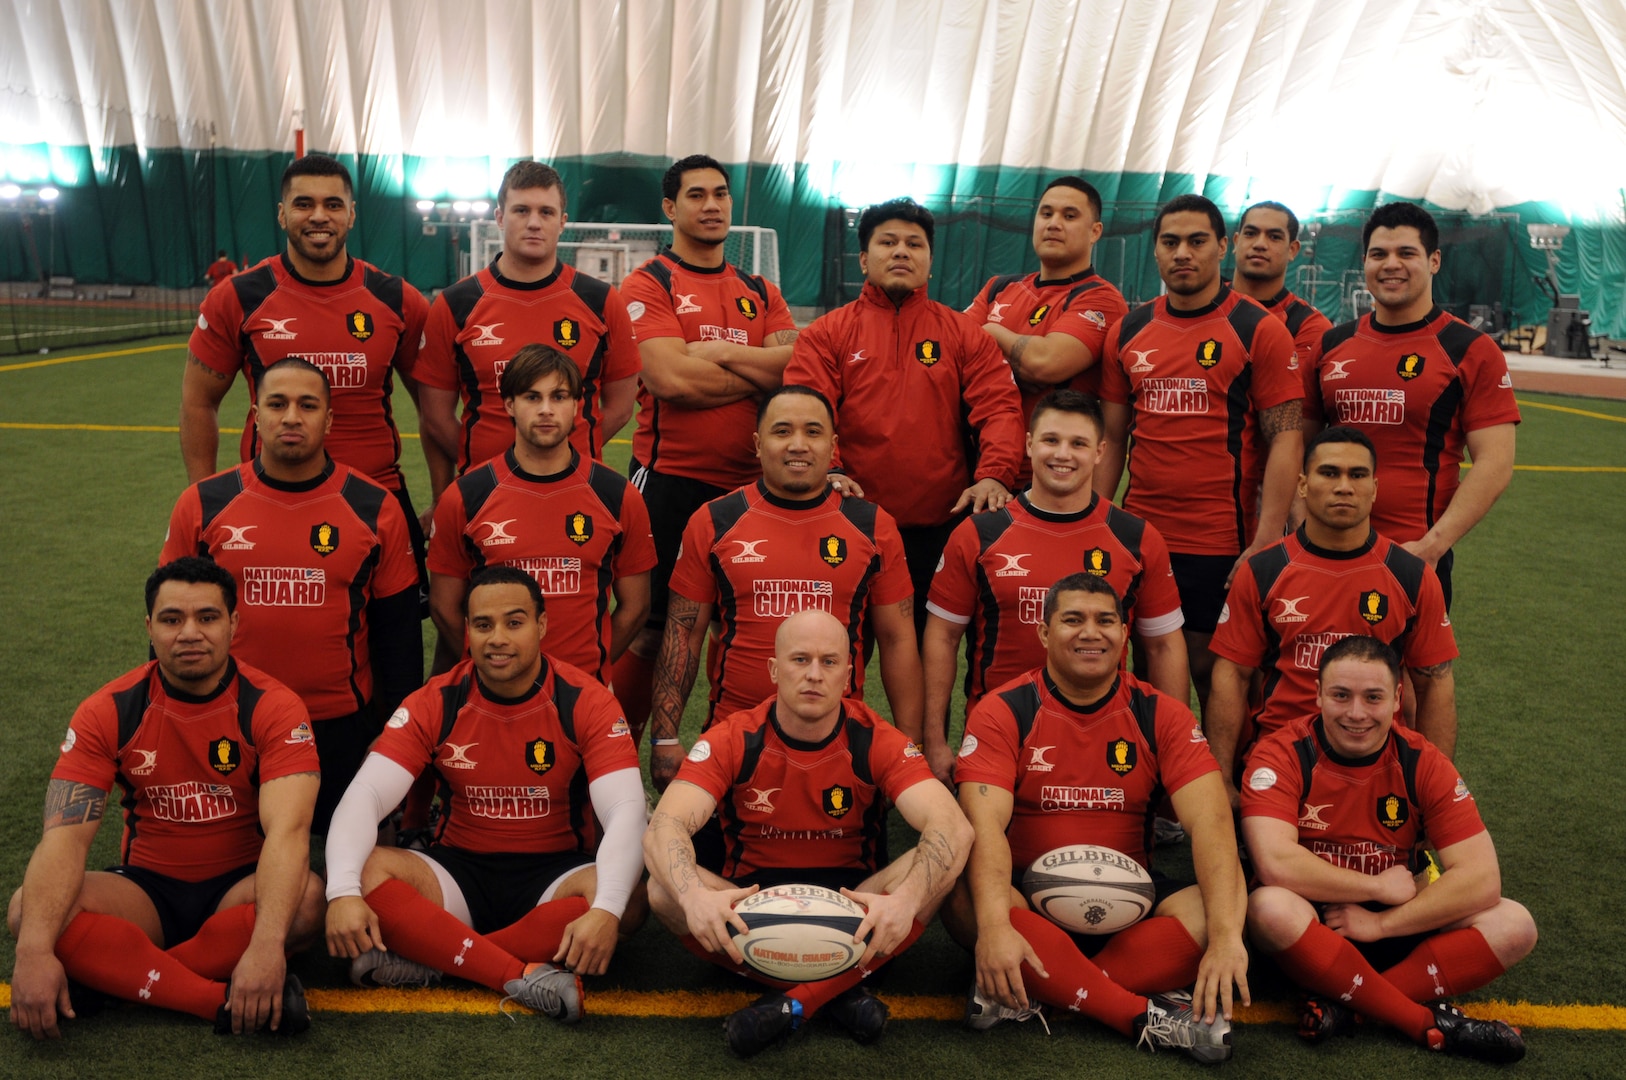 The Alaska Maulers, an Alaska National Guard-sponsored rugby team, poses for a photo before heading down to Nevada for The Las Vegas Invitational Tournament held Feb. 10 to 12. The Alaska Maulers will be competing against all-star teams from different countries all over the world.